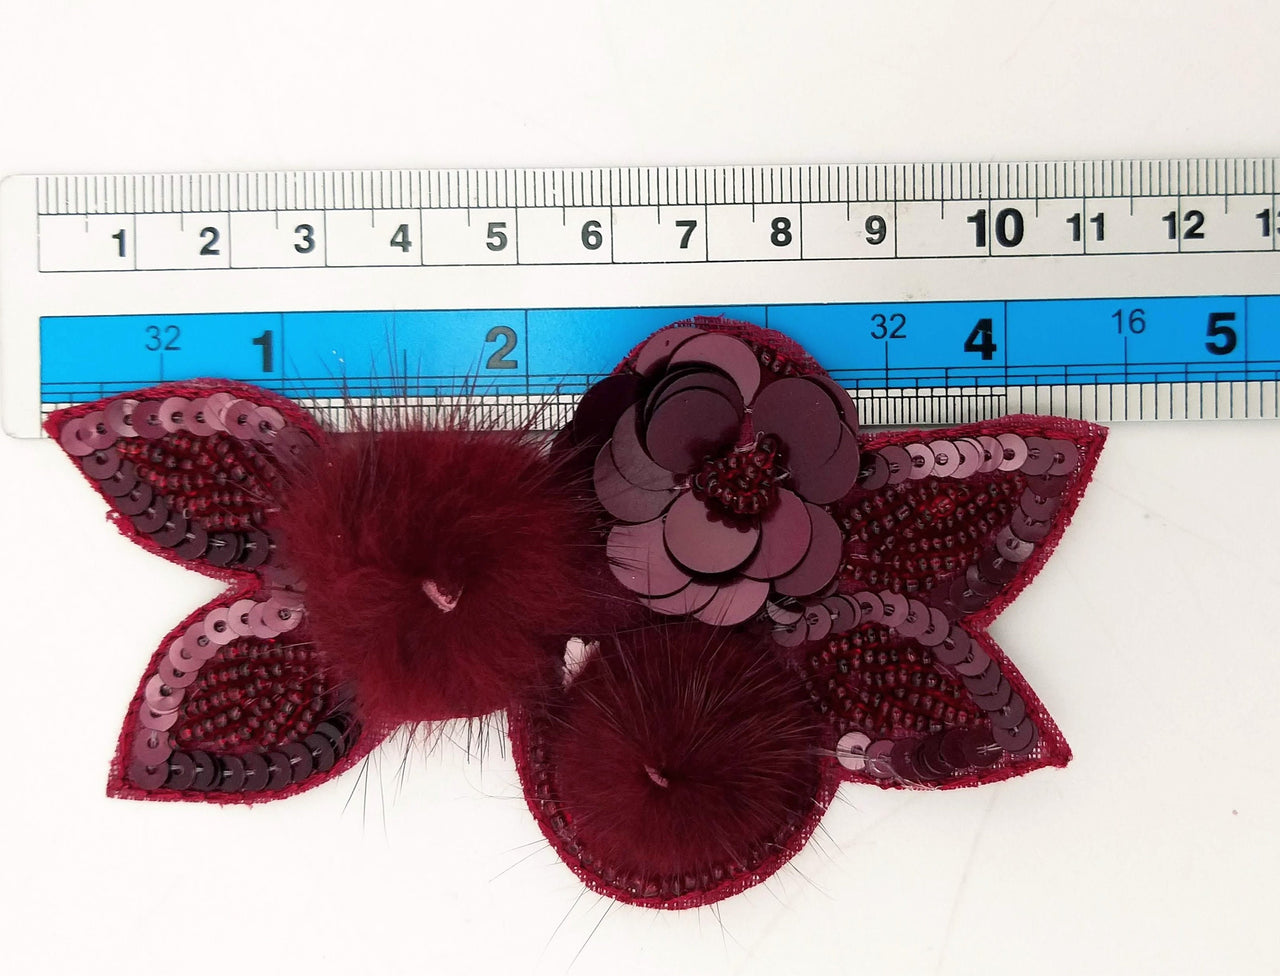 Wine Red Hand Embroidered Floral Applique, Beaded and Sequins Applique